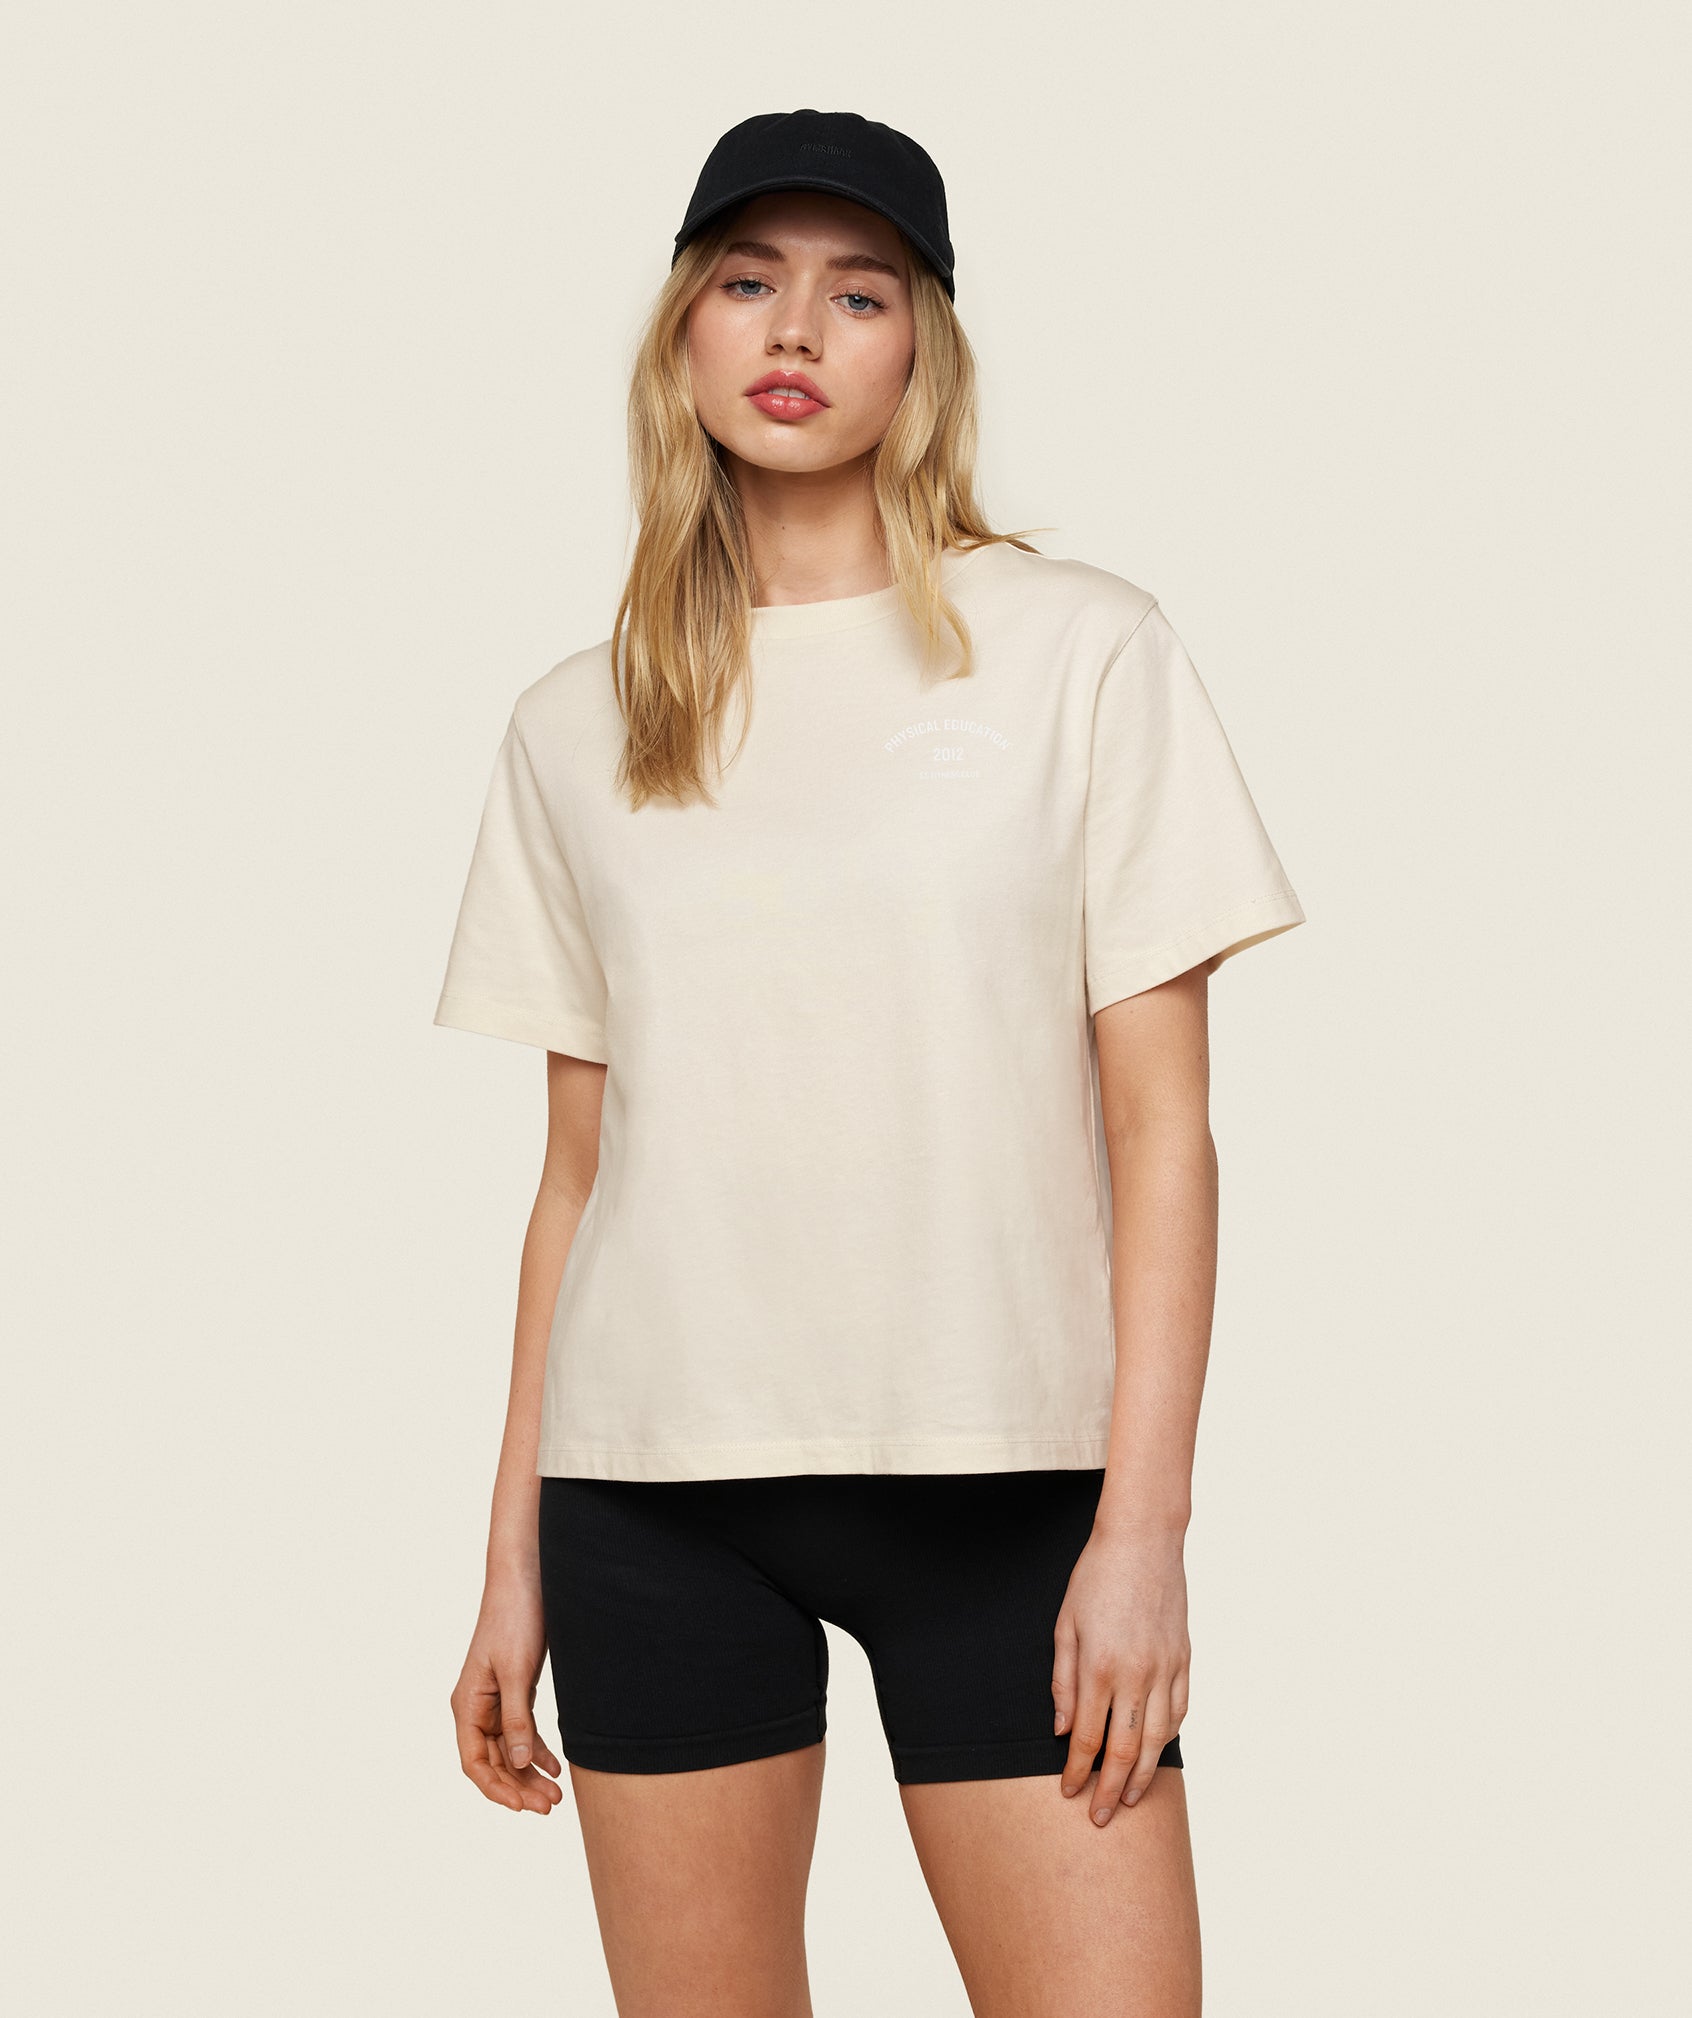 Phys Ed Graphic T-Shirt in Ecru White